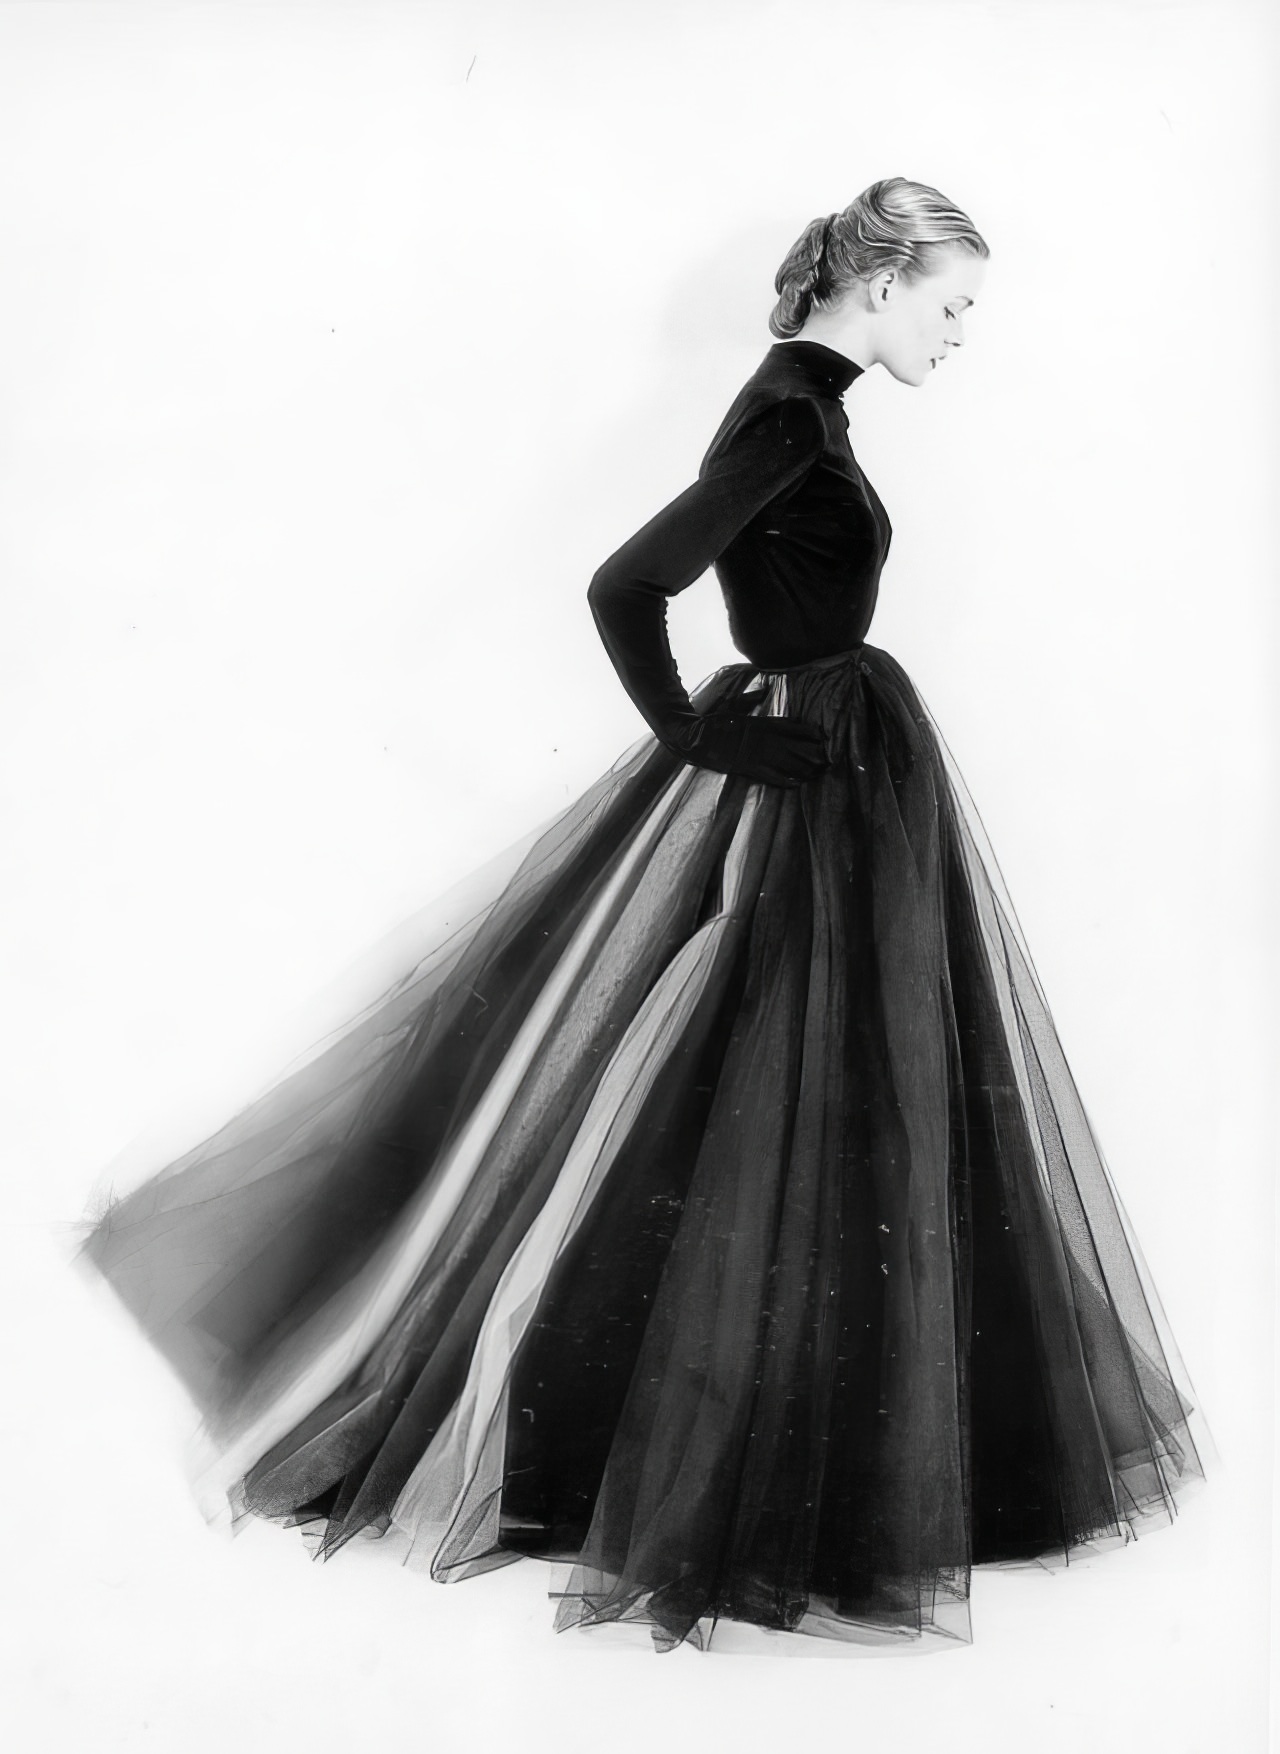 Susan Abraham in layers of tulle, 1951.